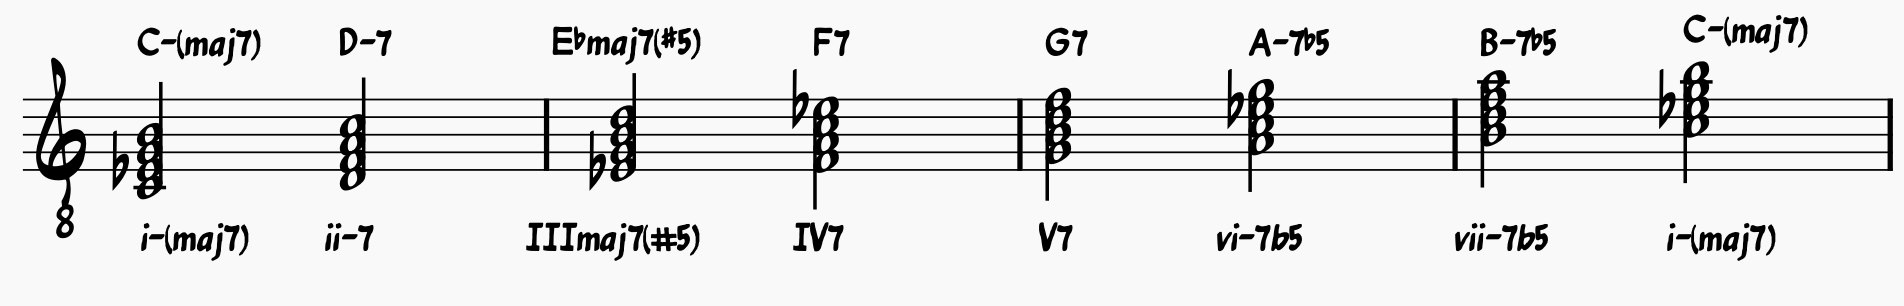 Melodic Minor Chord Scale (7thChords)